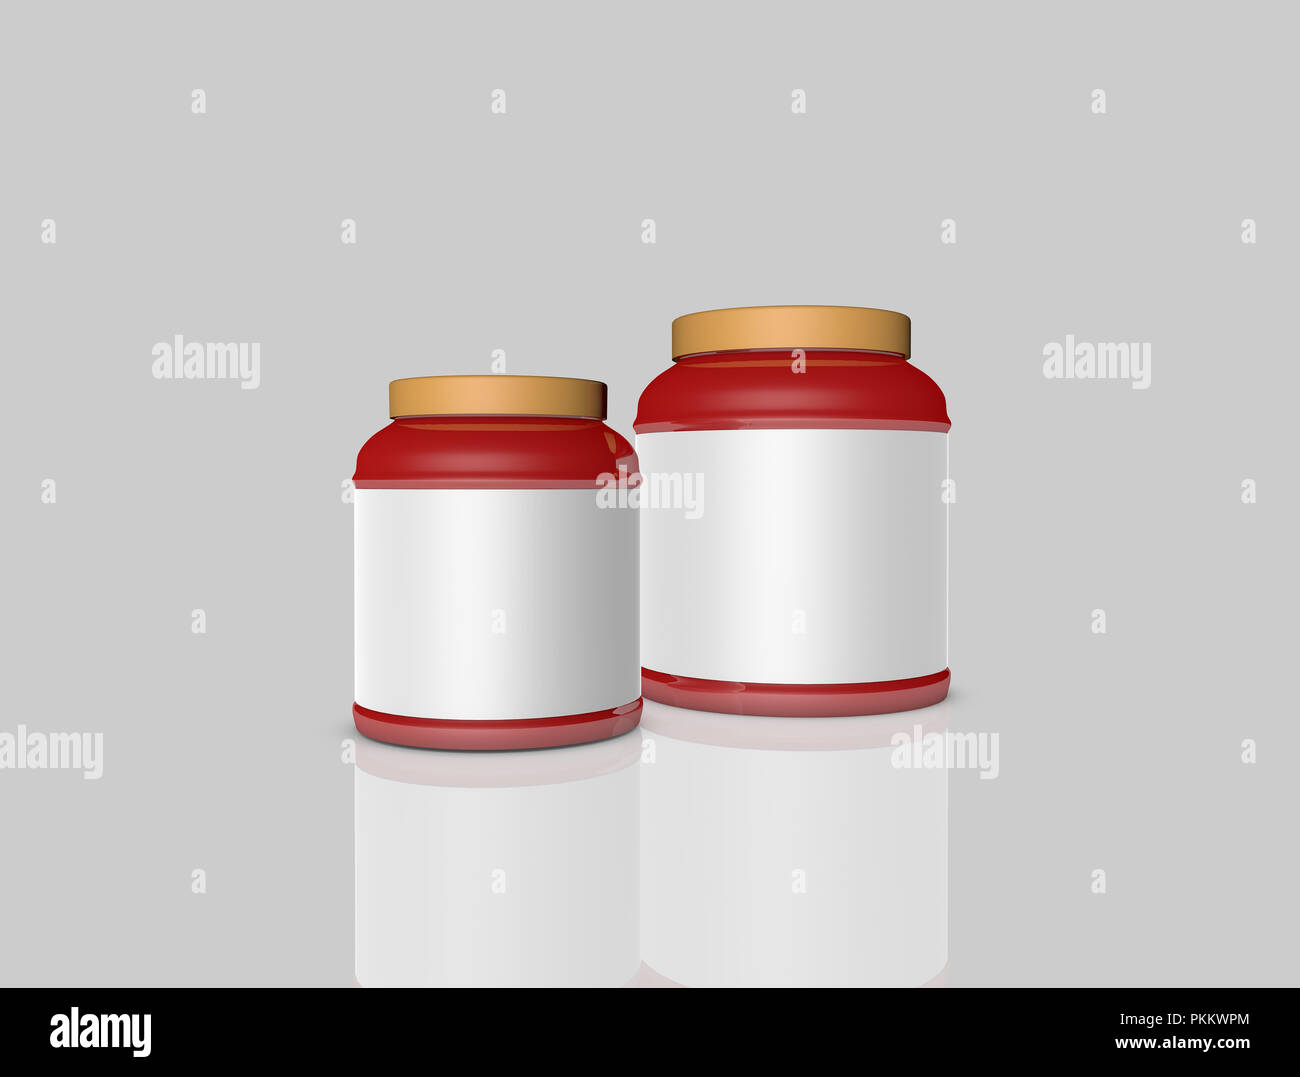 Containers Jars Bottles Mock up Stock Photo